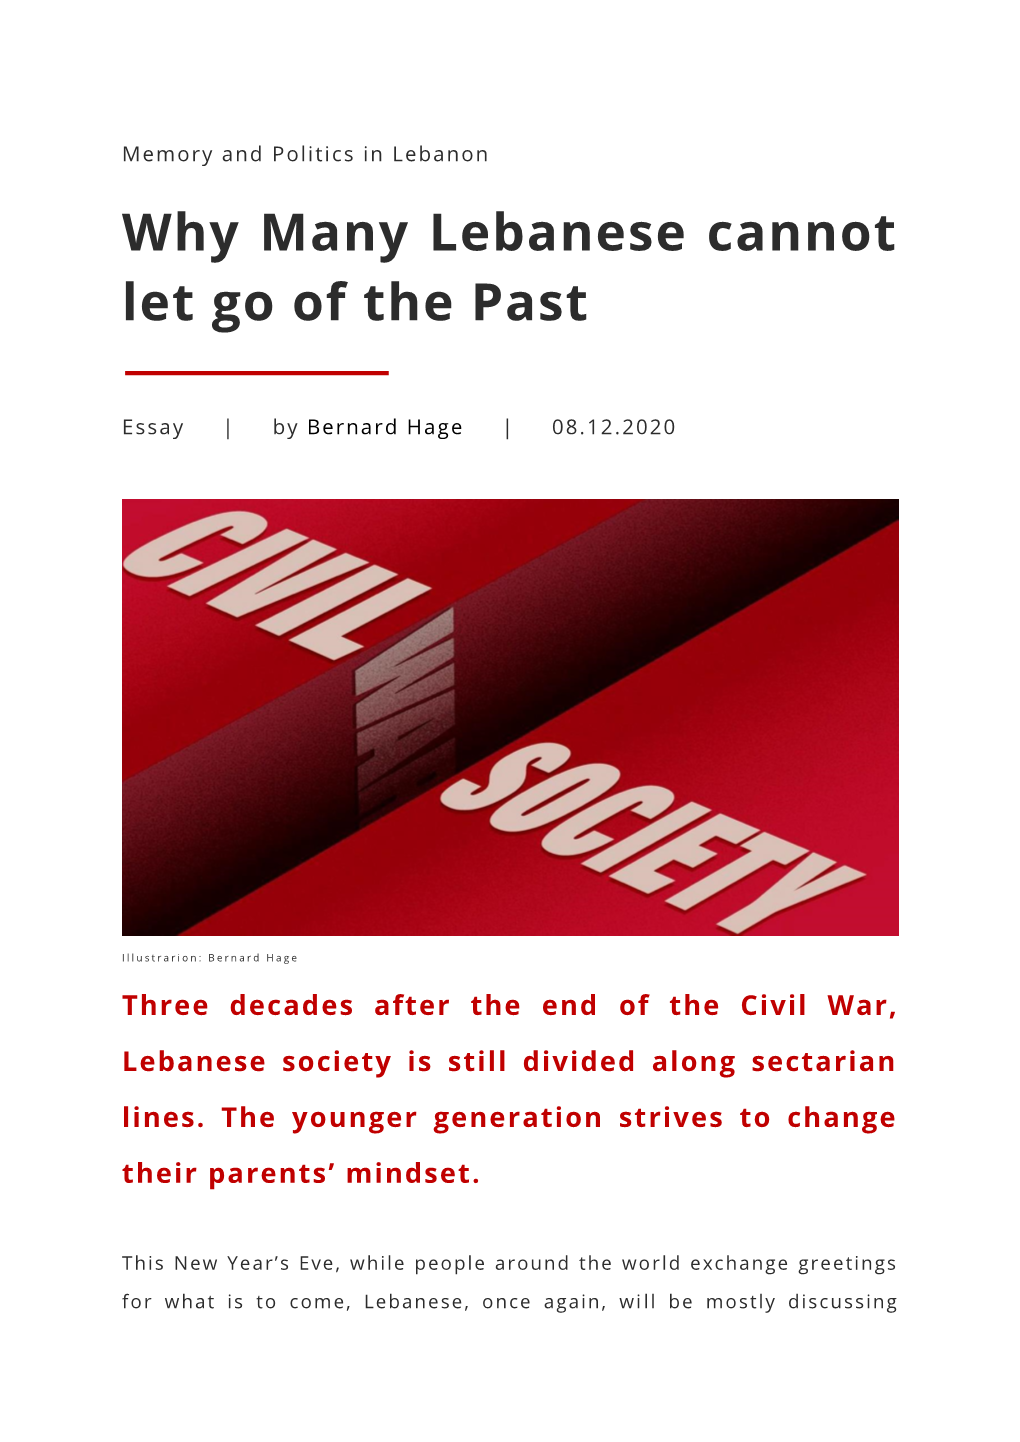 Why Many Lebanese Cannot Let Go of the Past